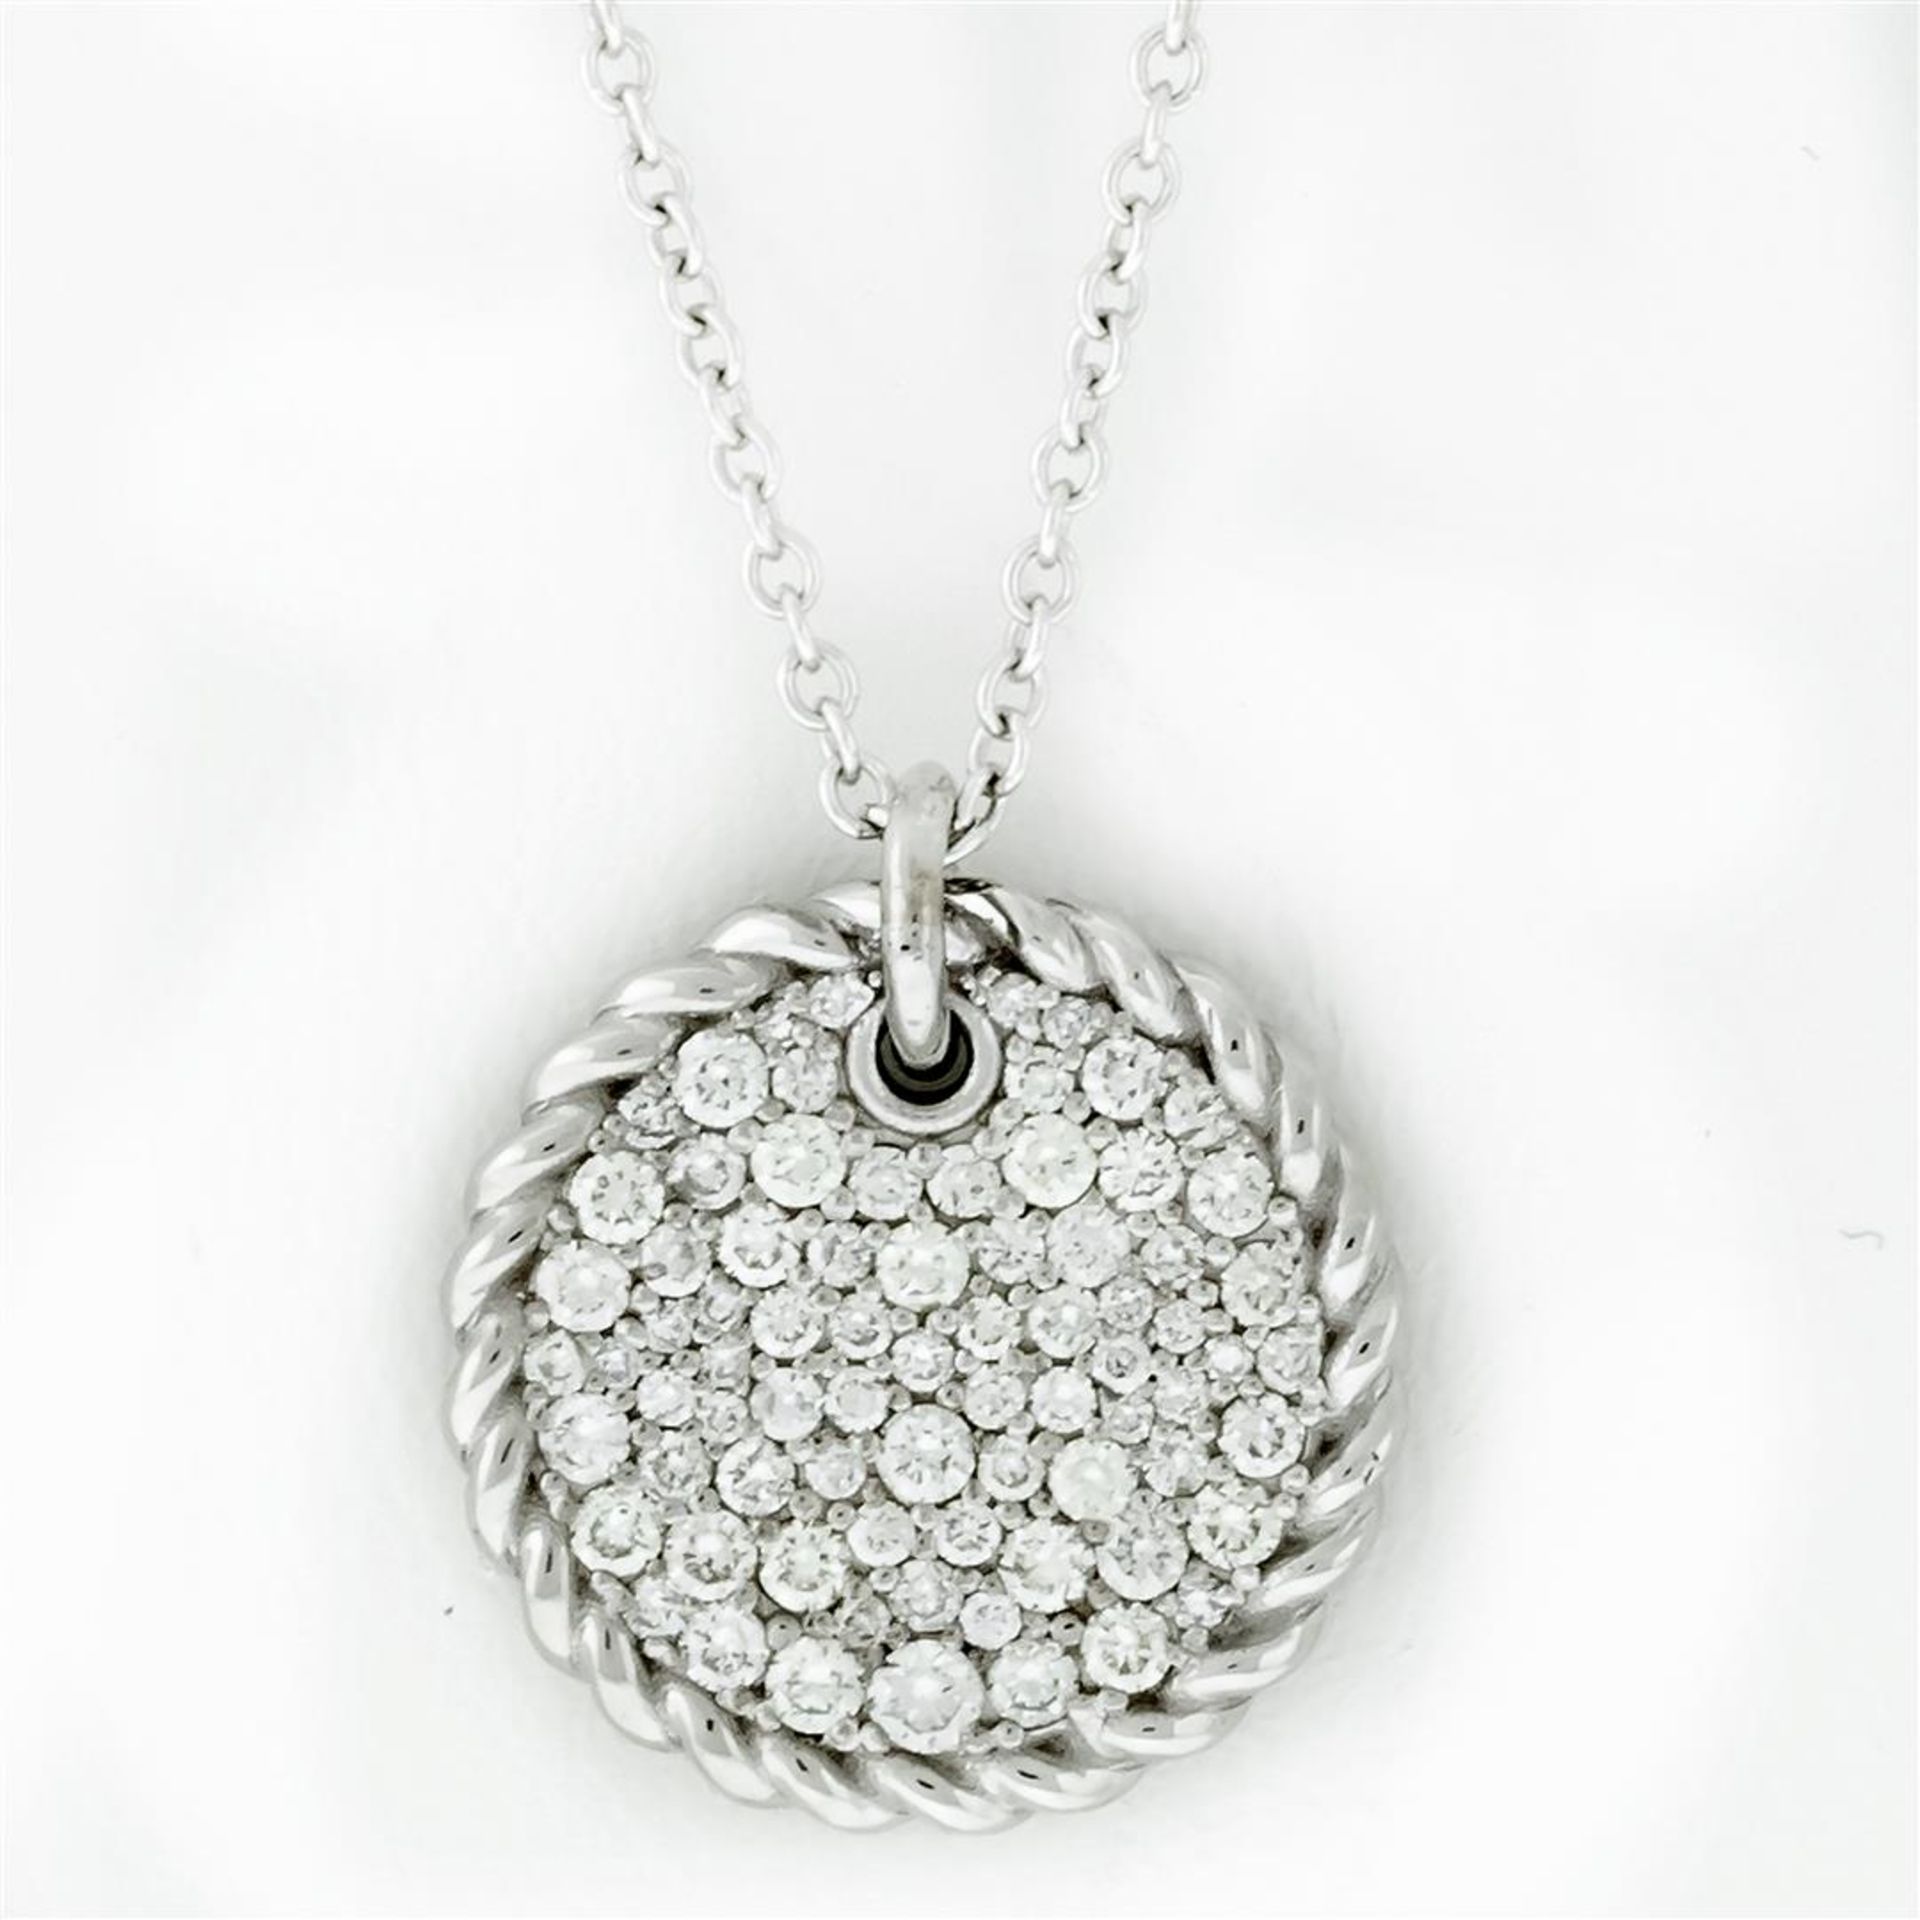 New 18k White Gold Diamond Cable Pendant with with 18K White Gold Chain - Image 2 of 7